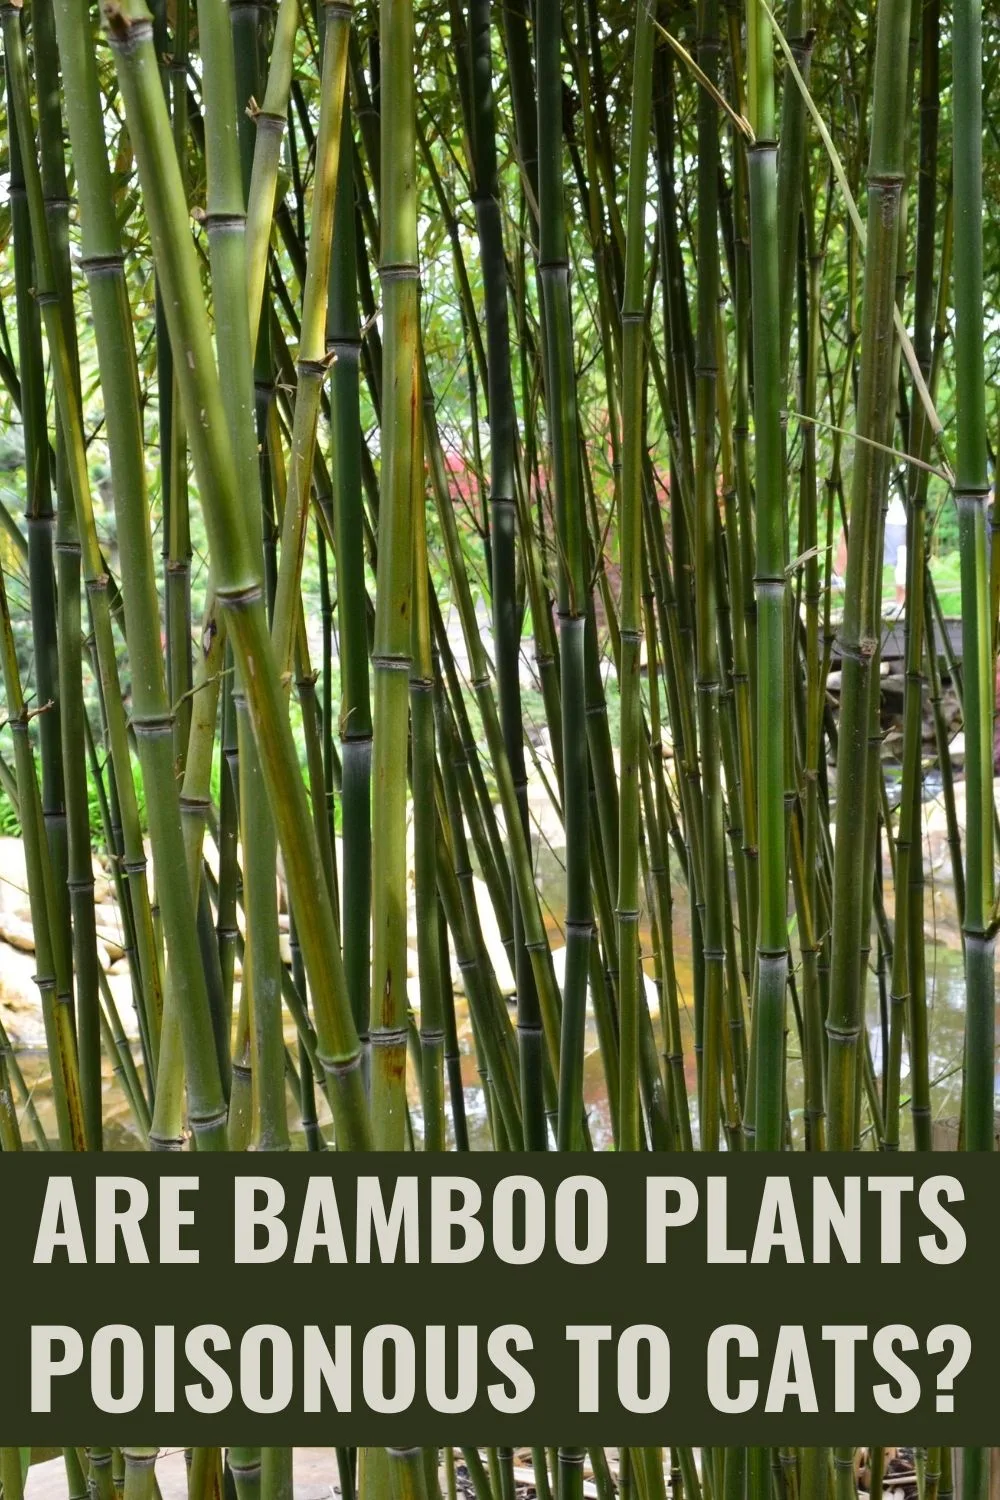 are Bamboo plants poisonous to cats